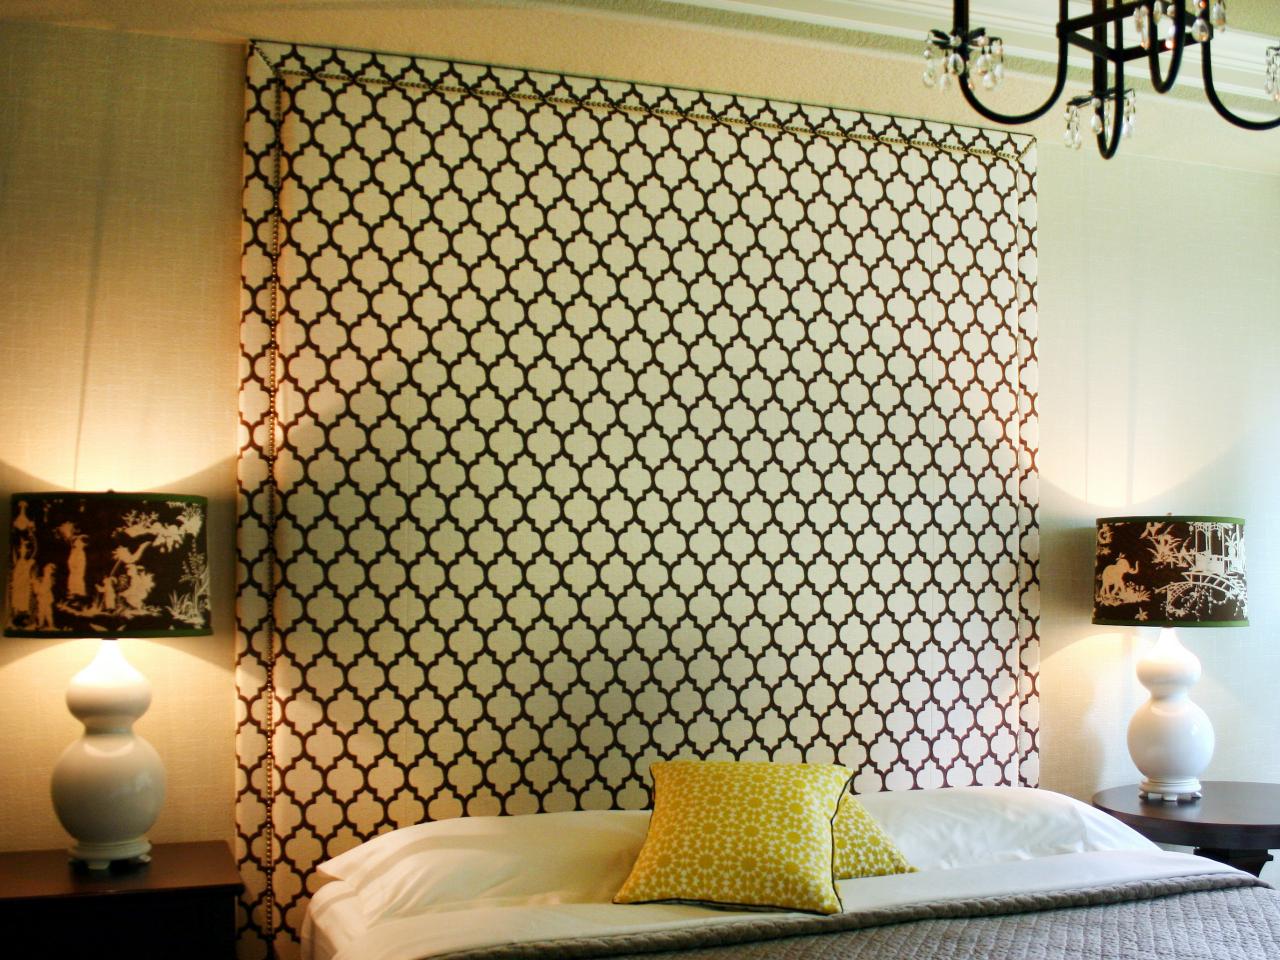 Upholstered Headboard With Nail Head, How To Build A King Size Upholstered Headboard